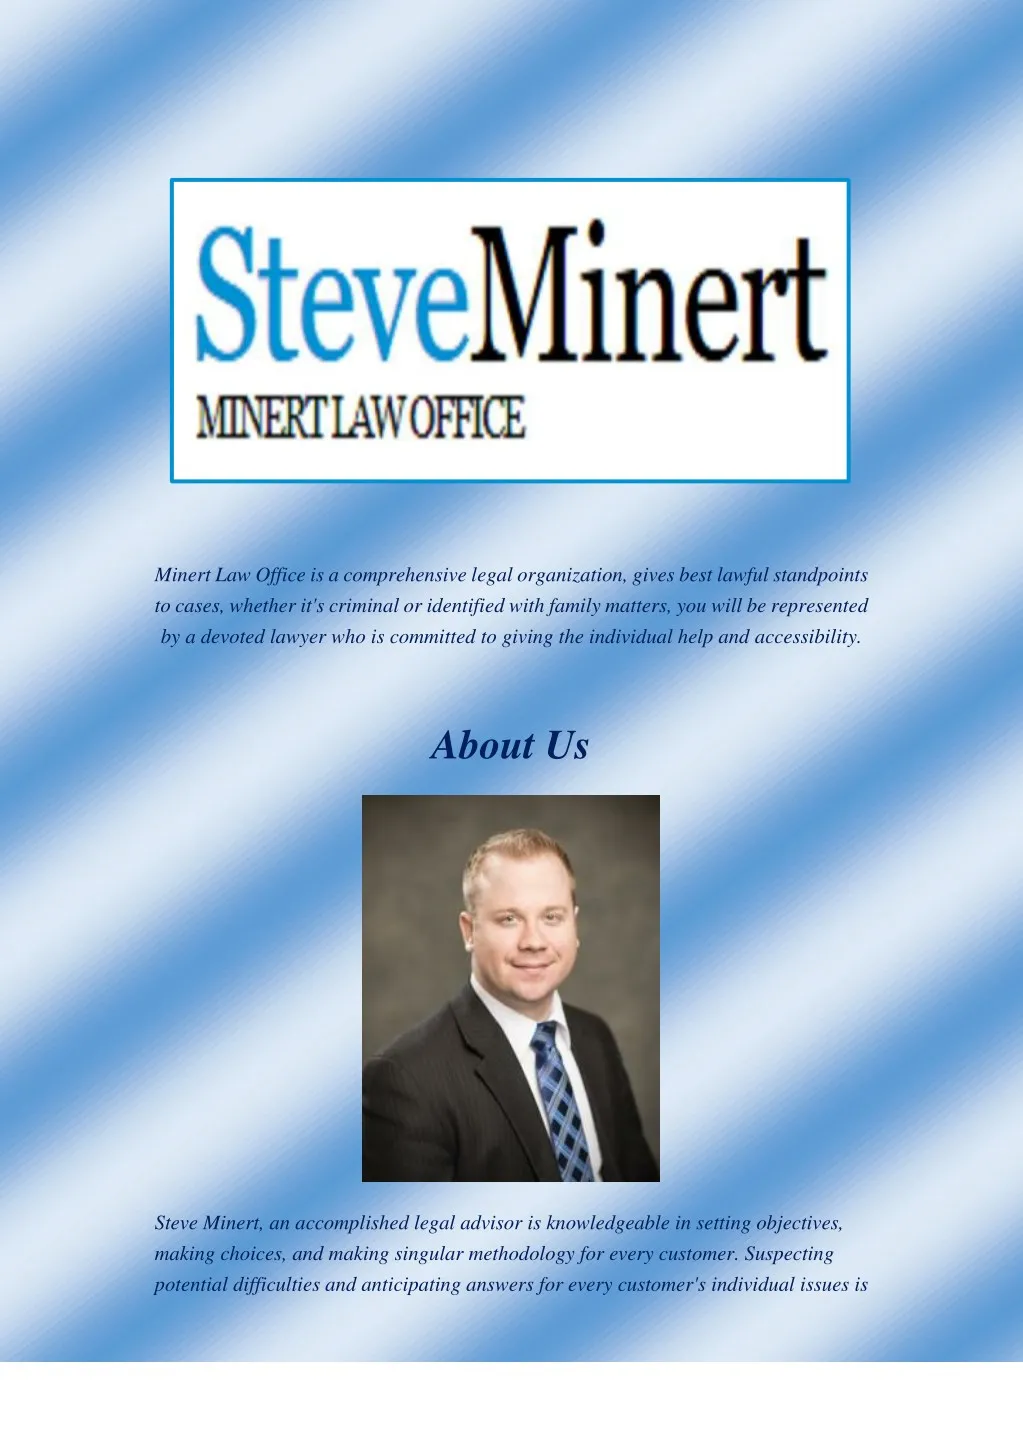 minert law office is a comprehensive legal